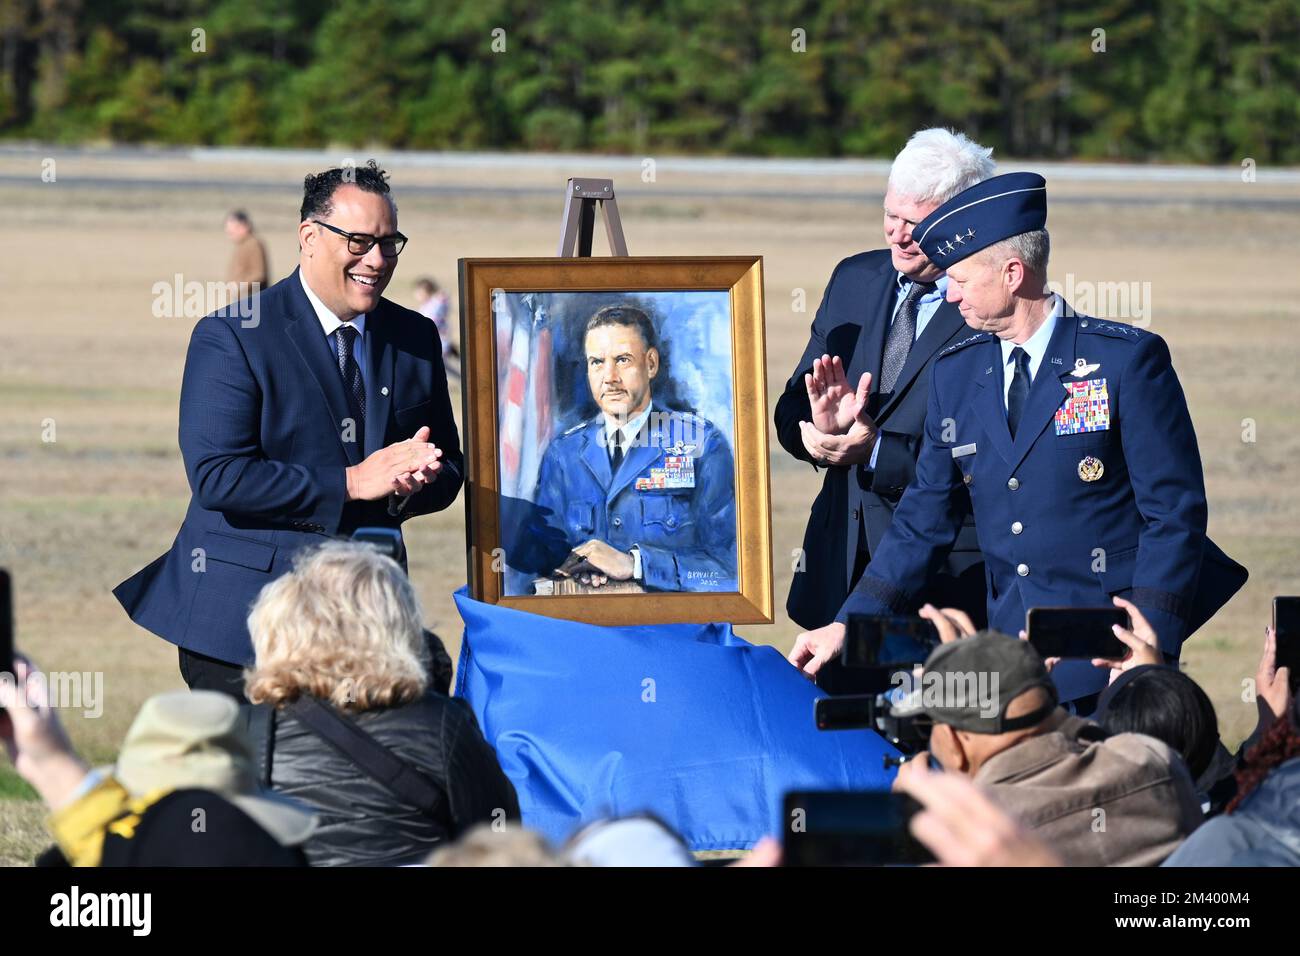 Kill Devil Hills, NC, USA, 17th December 2022, the portrait of General Benjamin O. Davis Jr. who commanded the Tuskeege Airmen is unveiled by Doug Melville and Gen. Mark D. Kelly at the 119th anniversary of the Wright Brothers first powered flight. Credit D Guest Smith / Alamy Live News Stock Photo